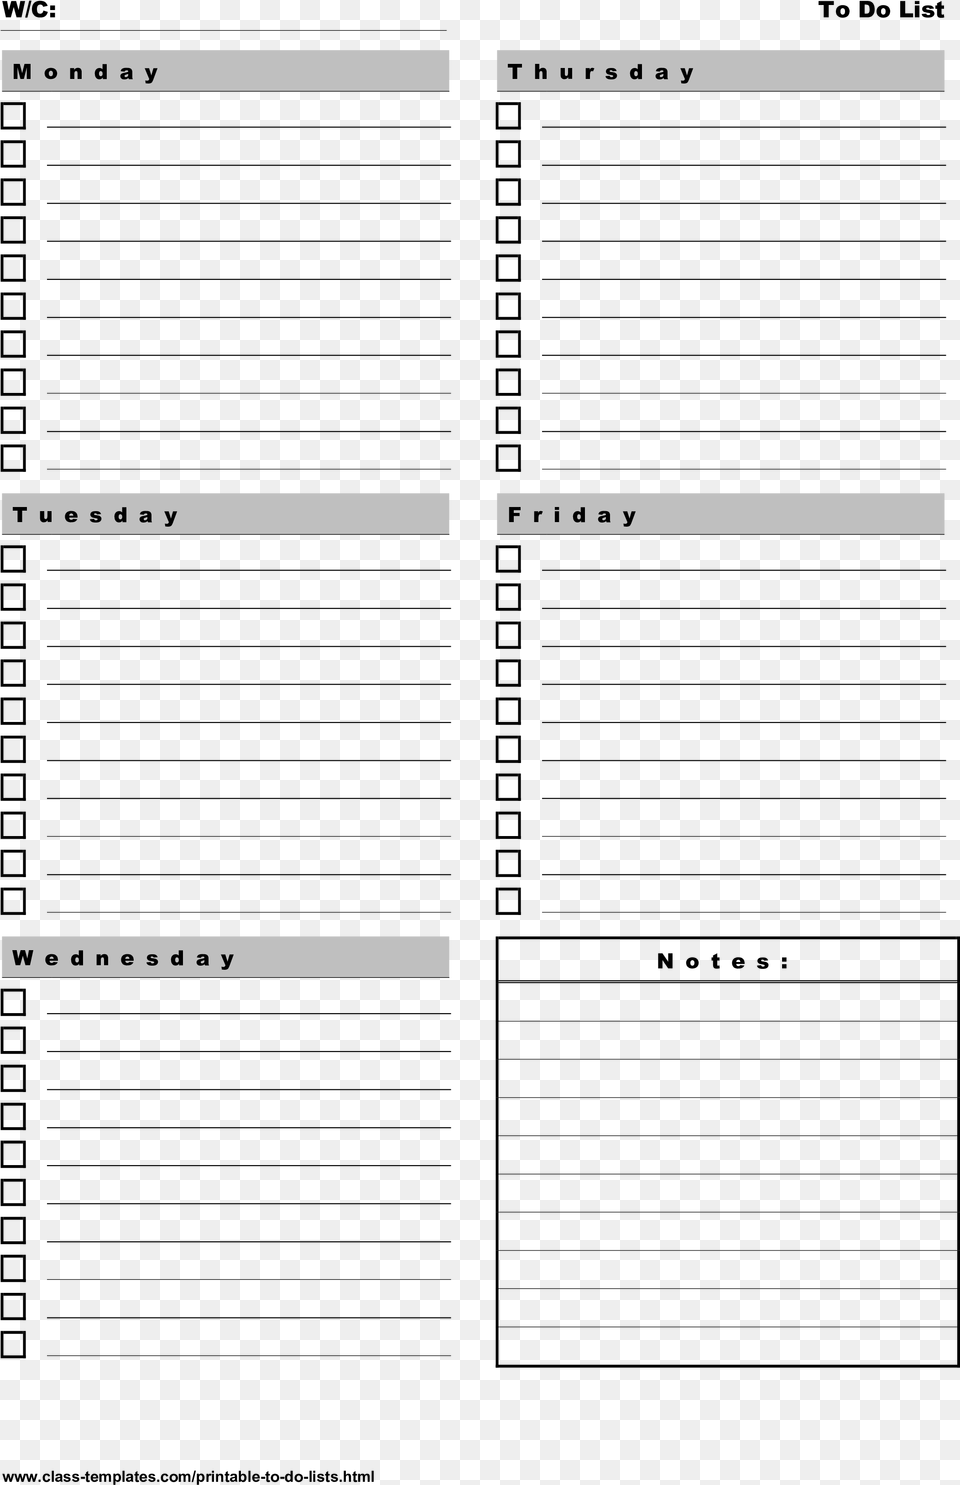 Printable To Do List Five Days A Week Main Image Five Days To Do List, Page, Text Png